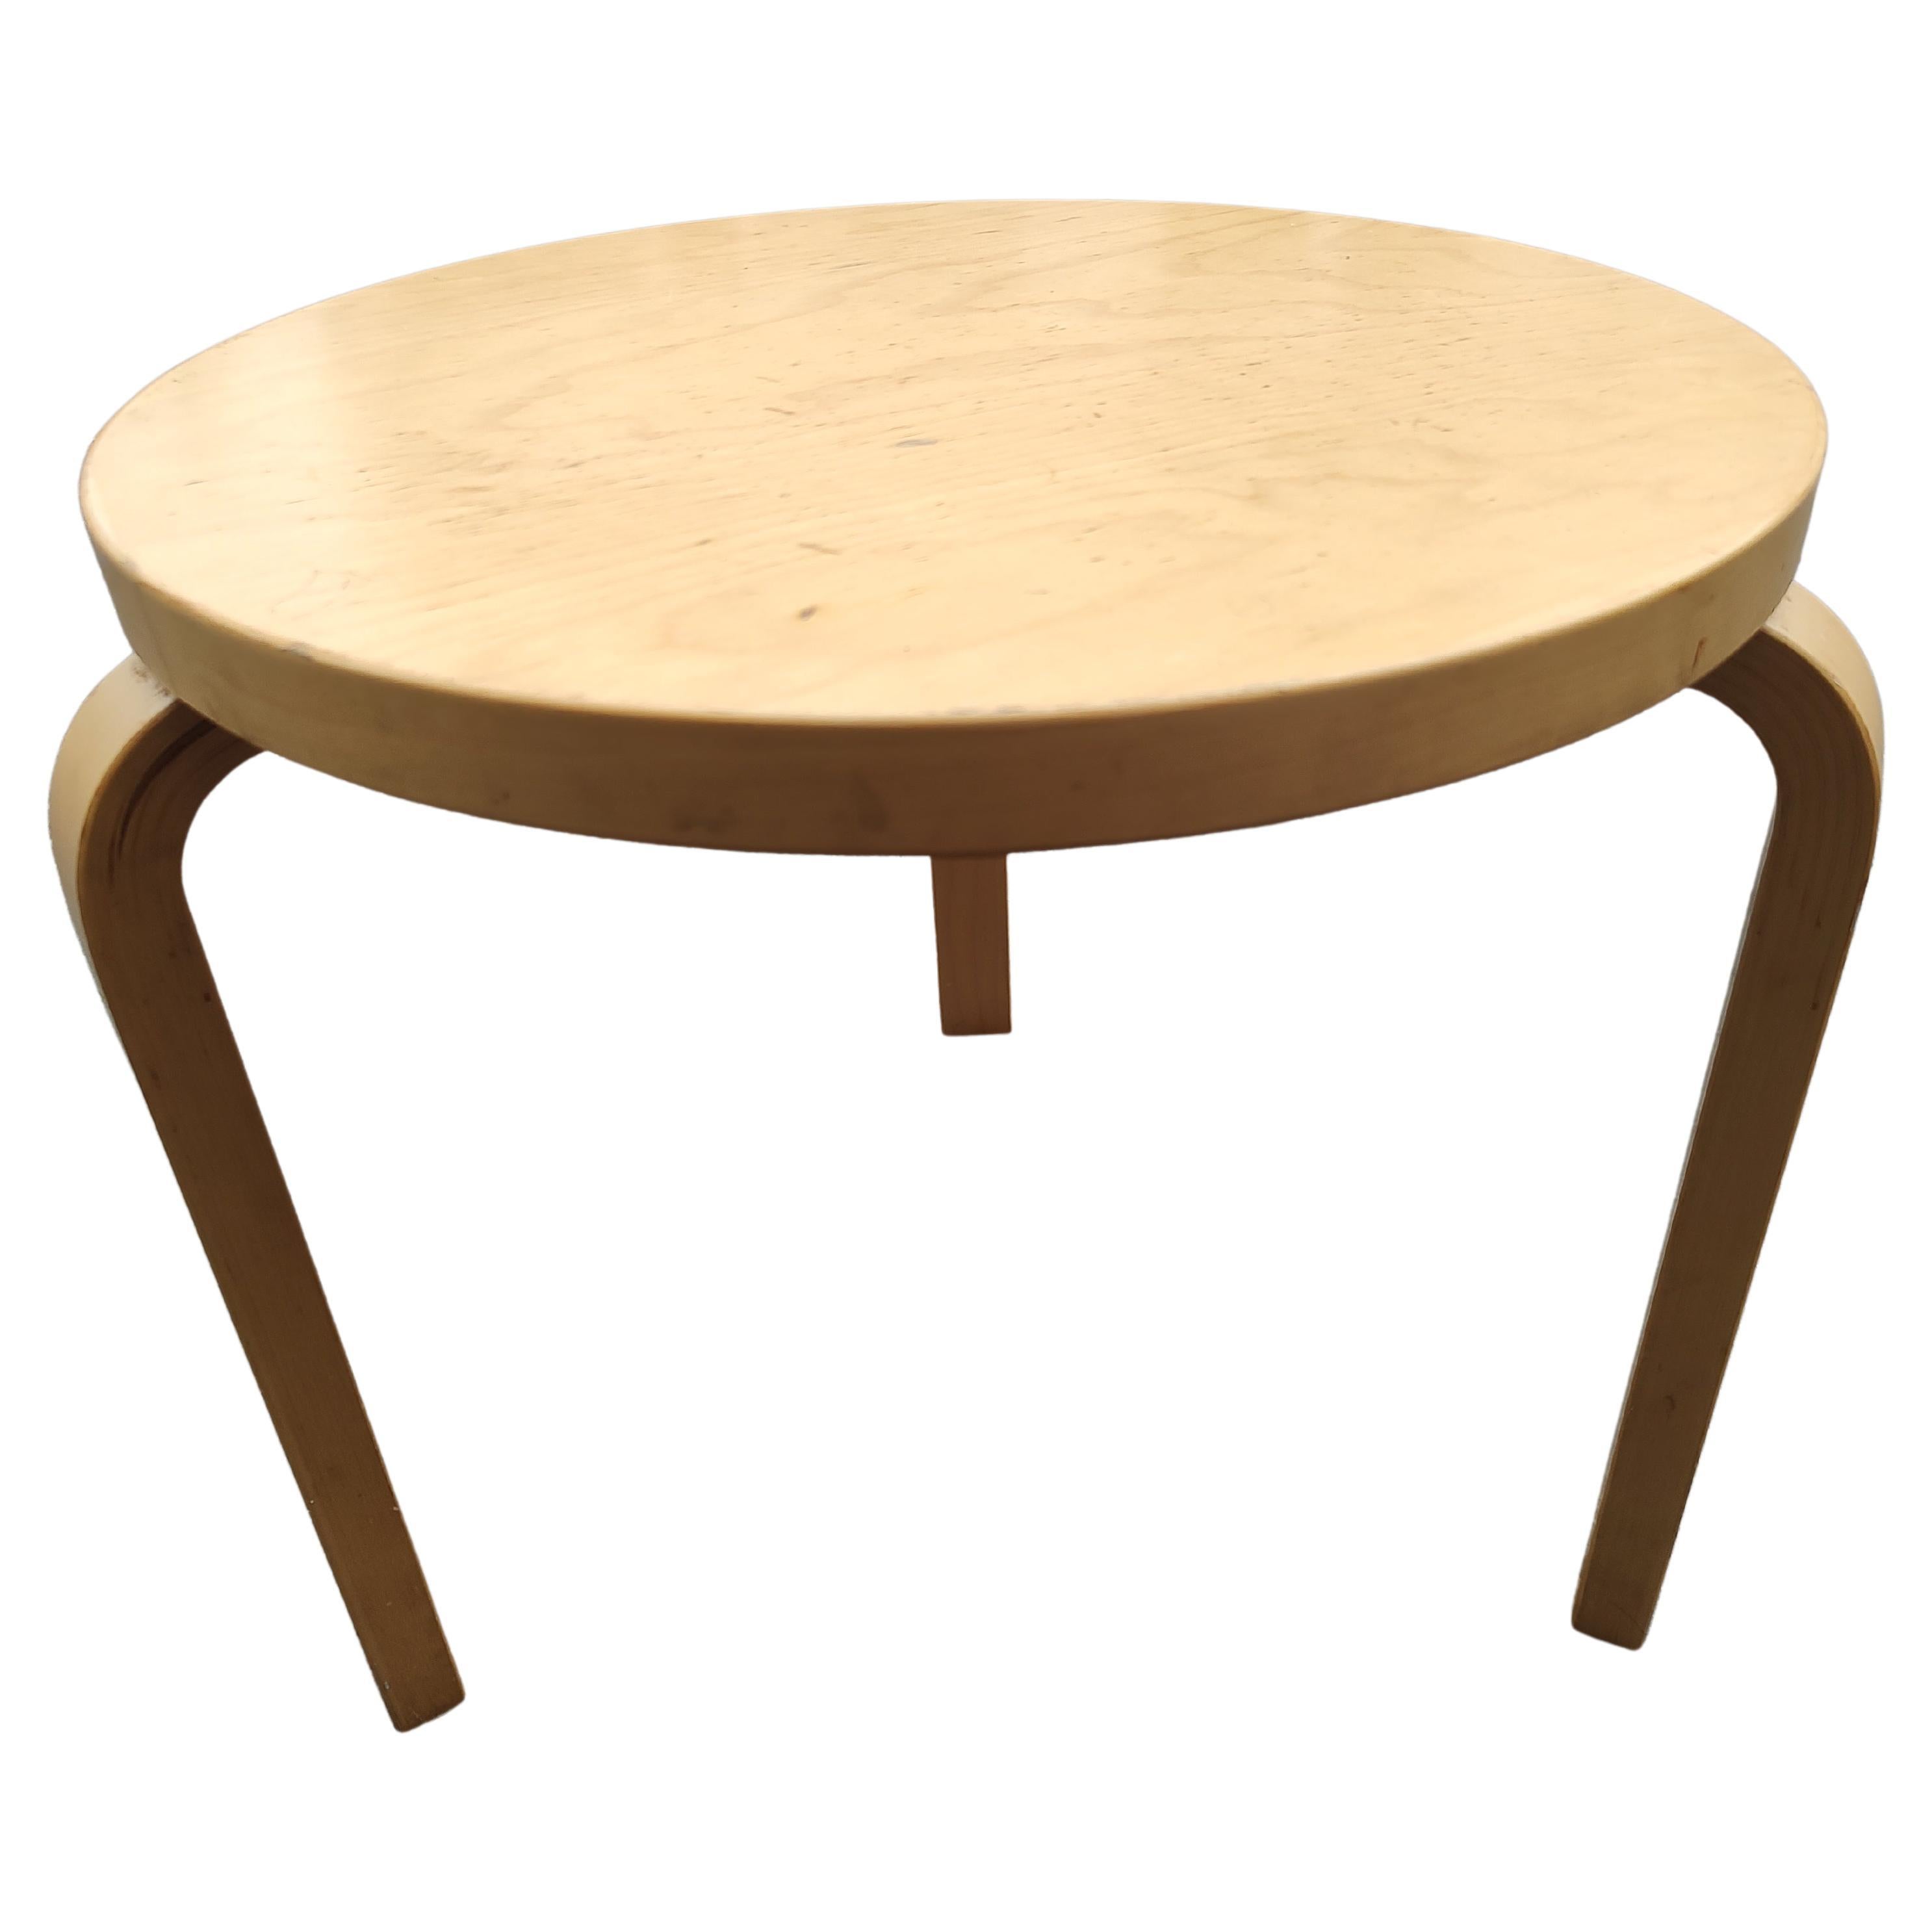 Late 20th Century Mid Century Modern Sculptural Round with Bent Legs by Alvar Aalto for Artek For Sale